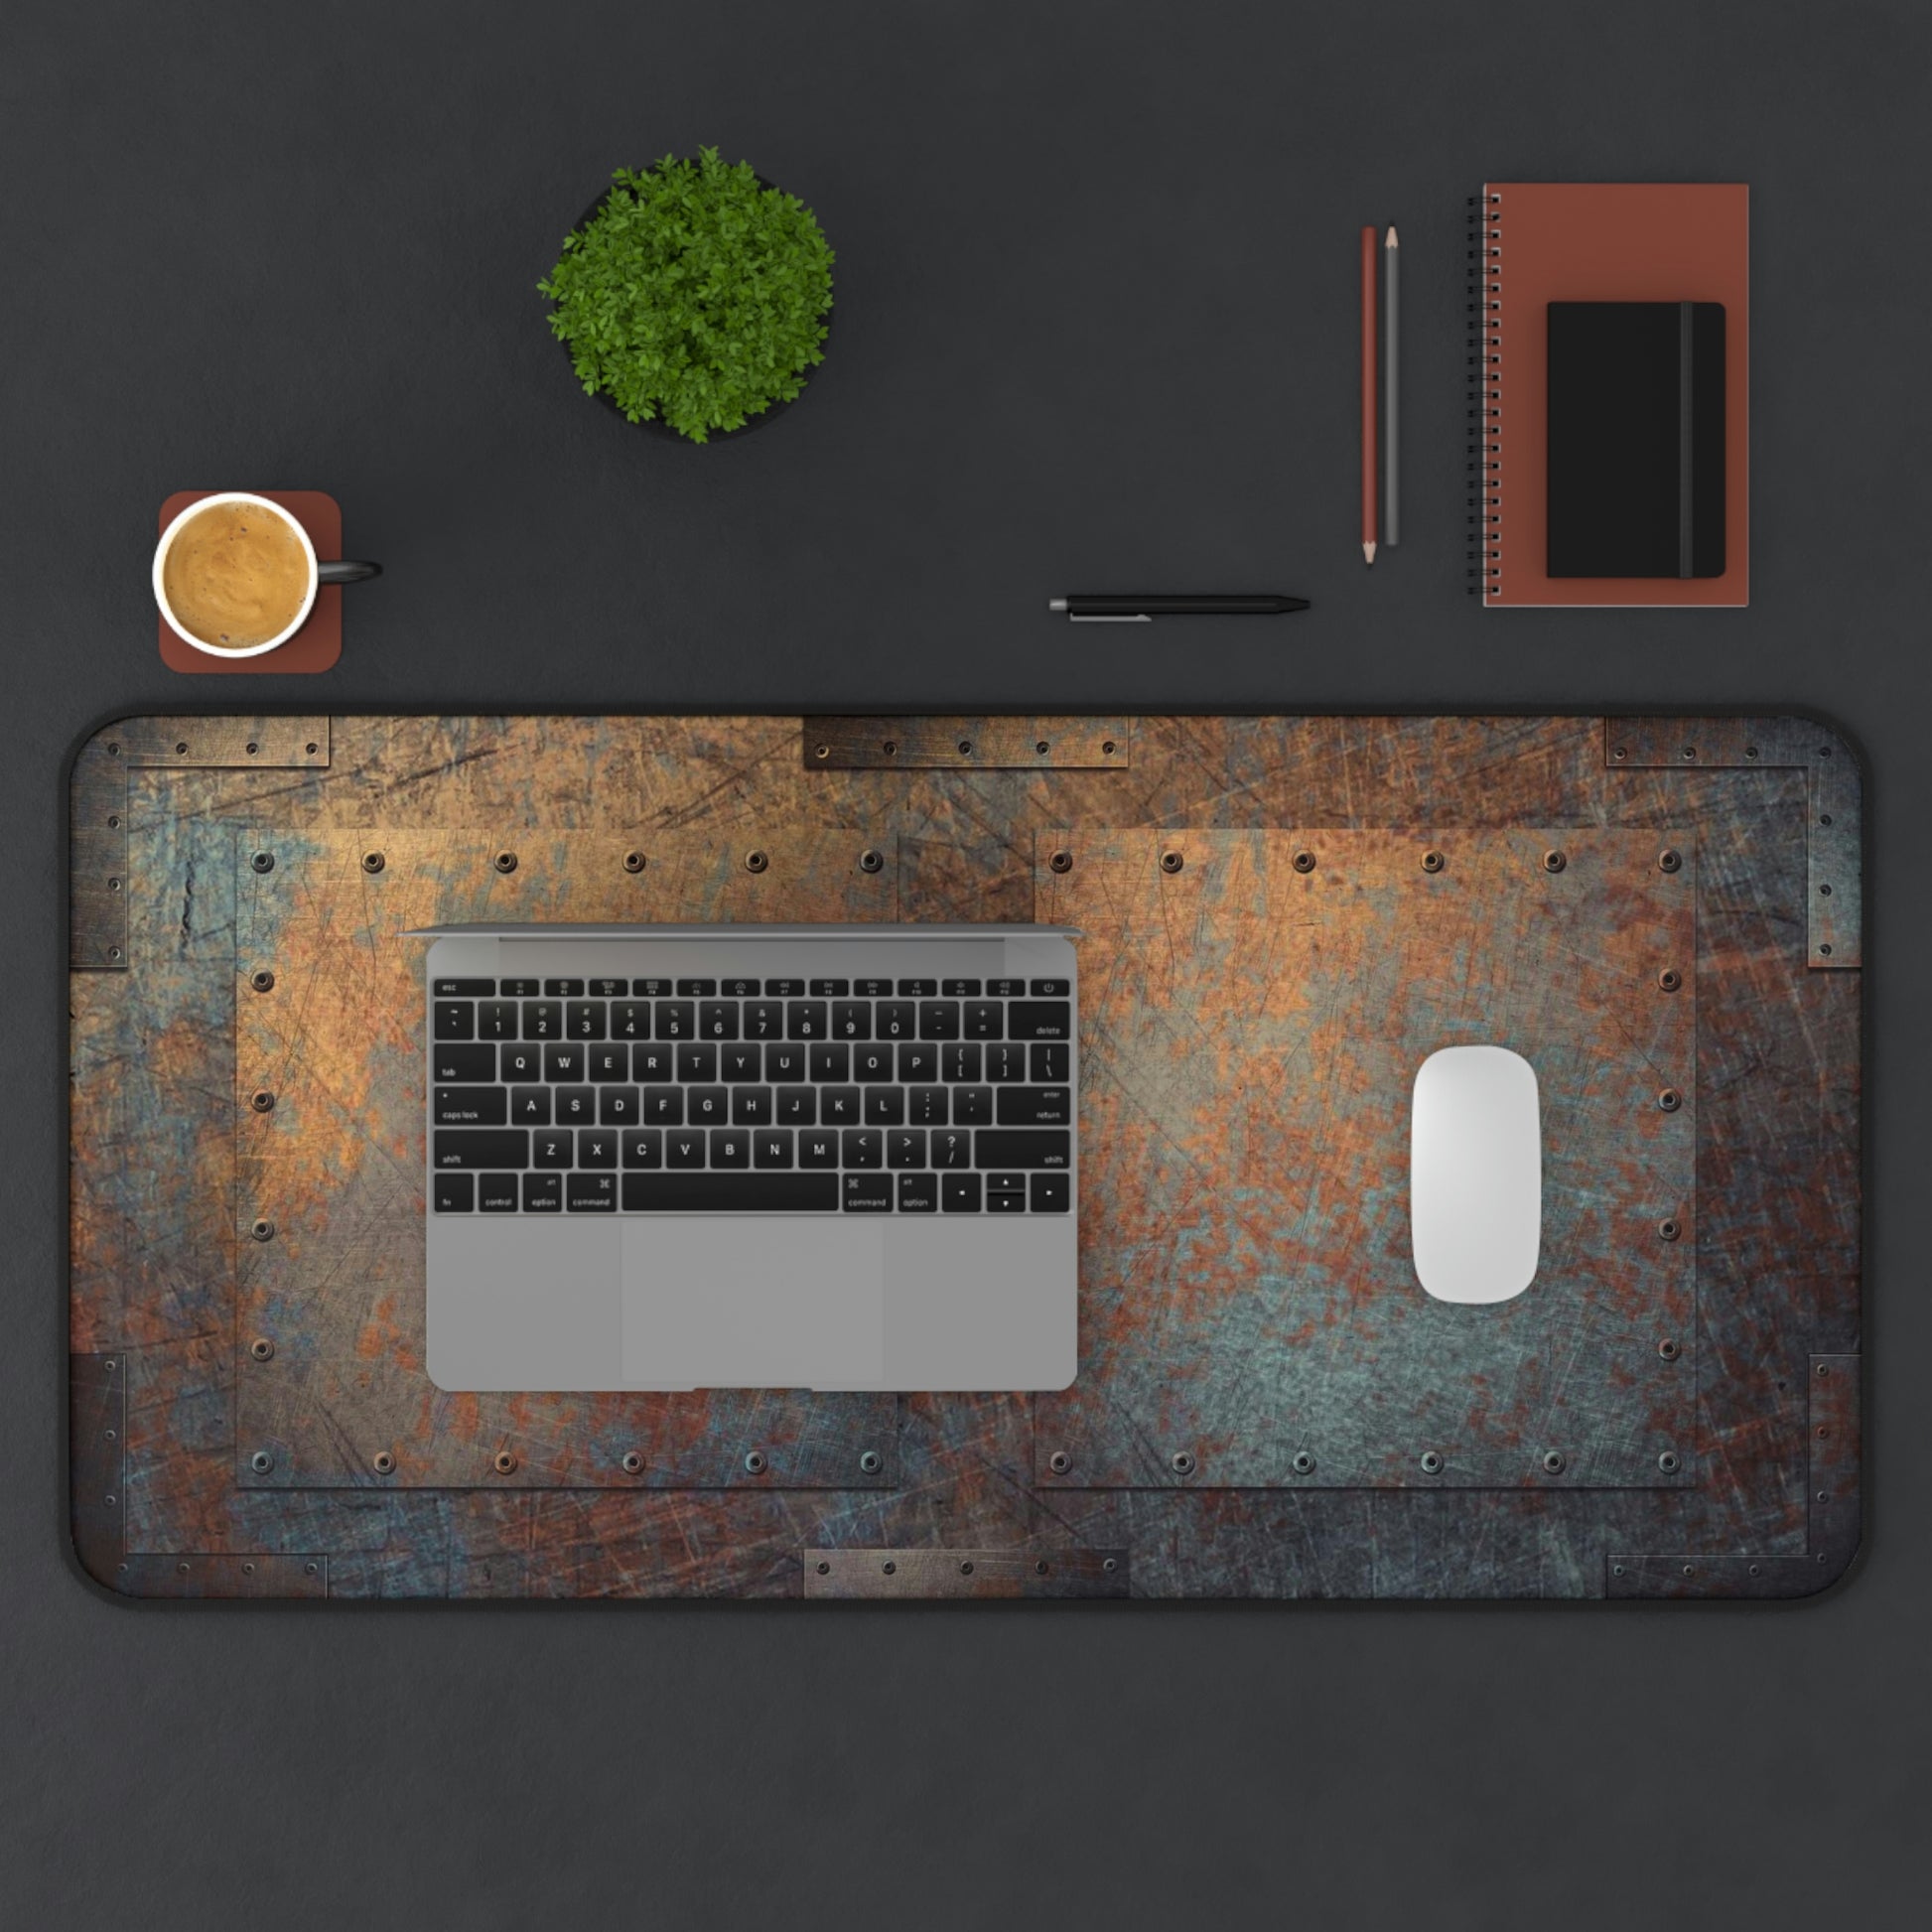 Steampunk Themed Desk Accessories - Patinated, Weather Beaten, Riveted Copper Sheets Print on Neoprene Desk Mat 15.5 x 31 in situ with laptop